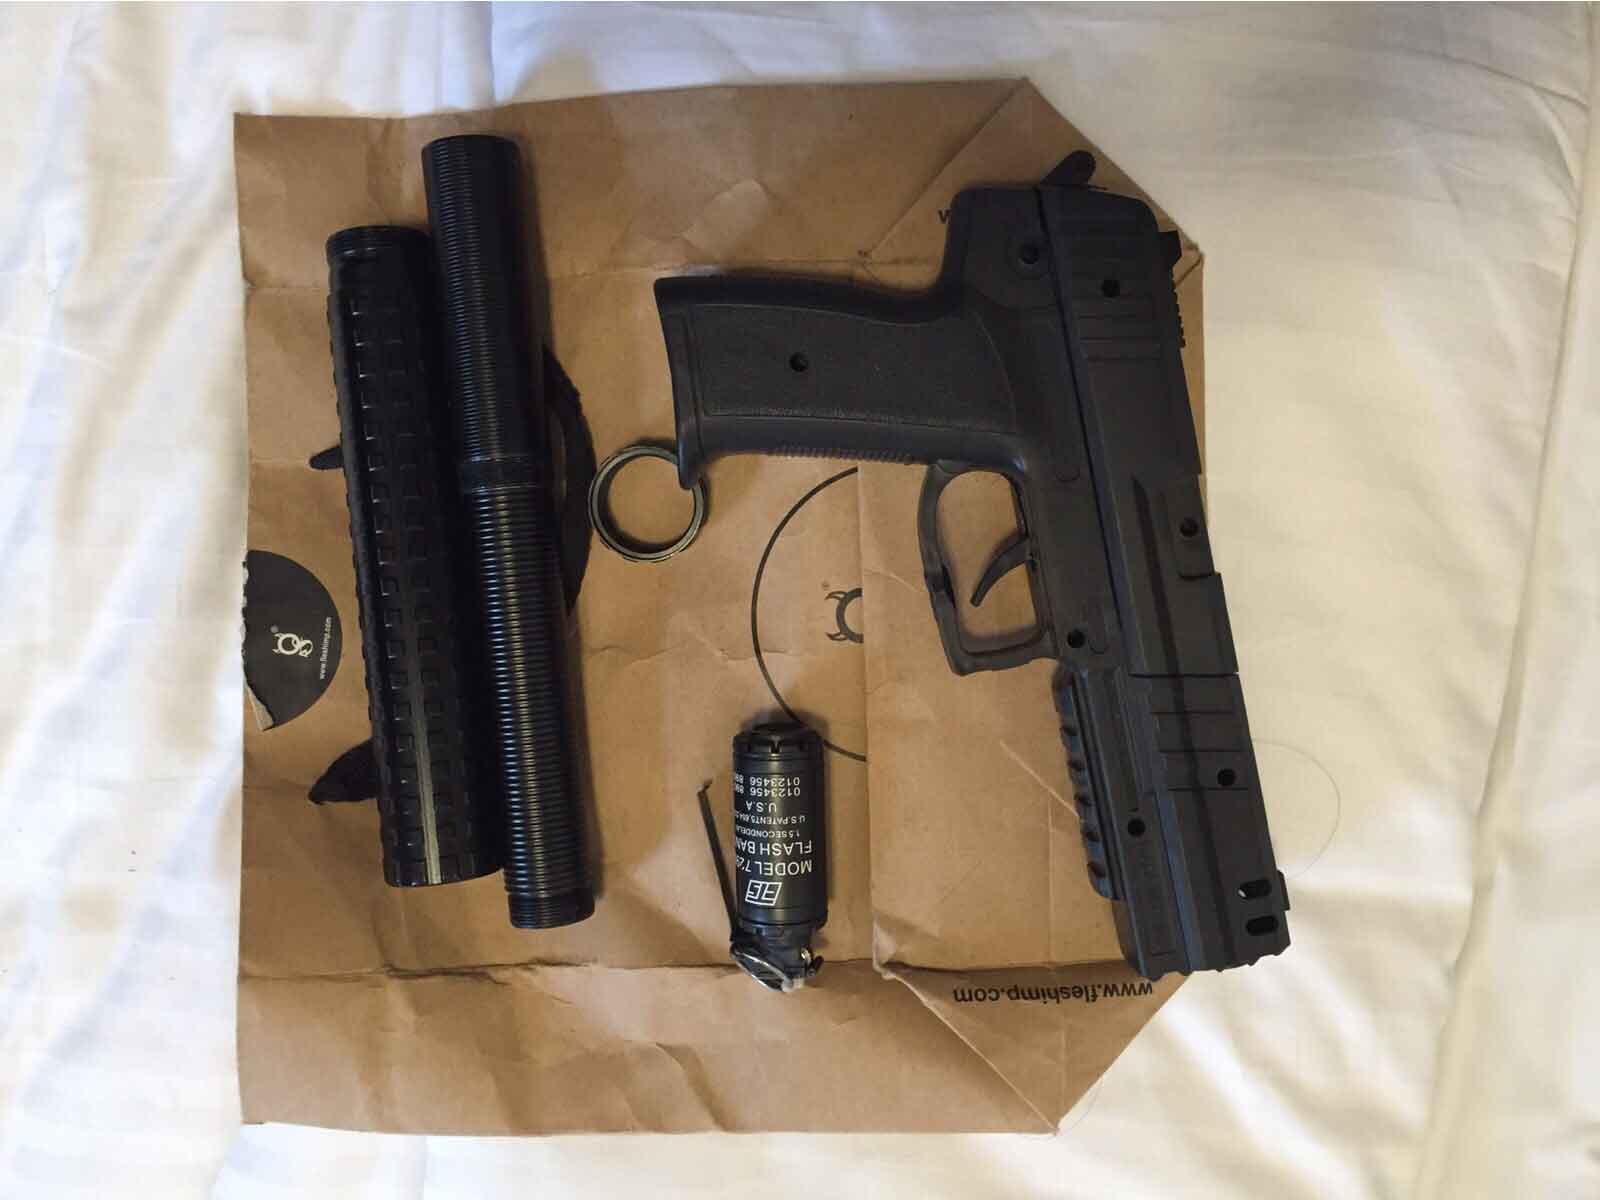 Photo-2: Replica gun recovered in CNB operation at Orange Grove on 29 Oct 2015.